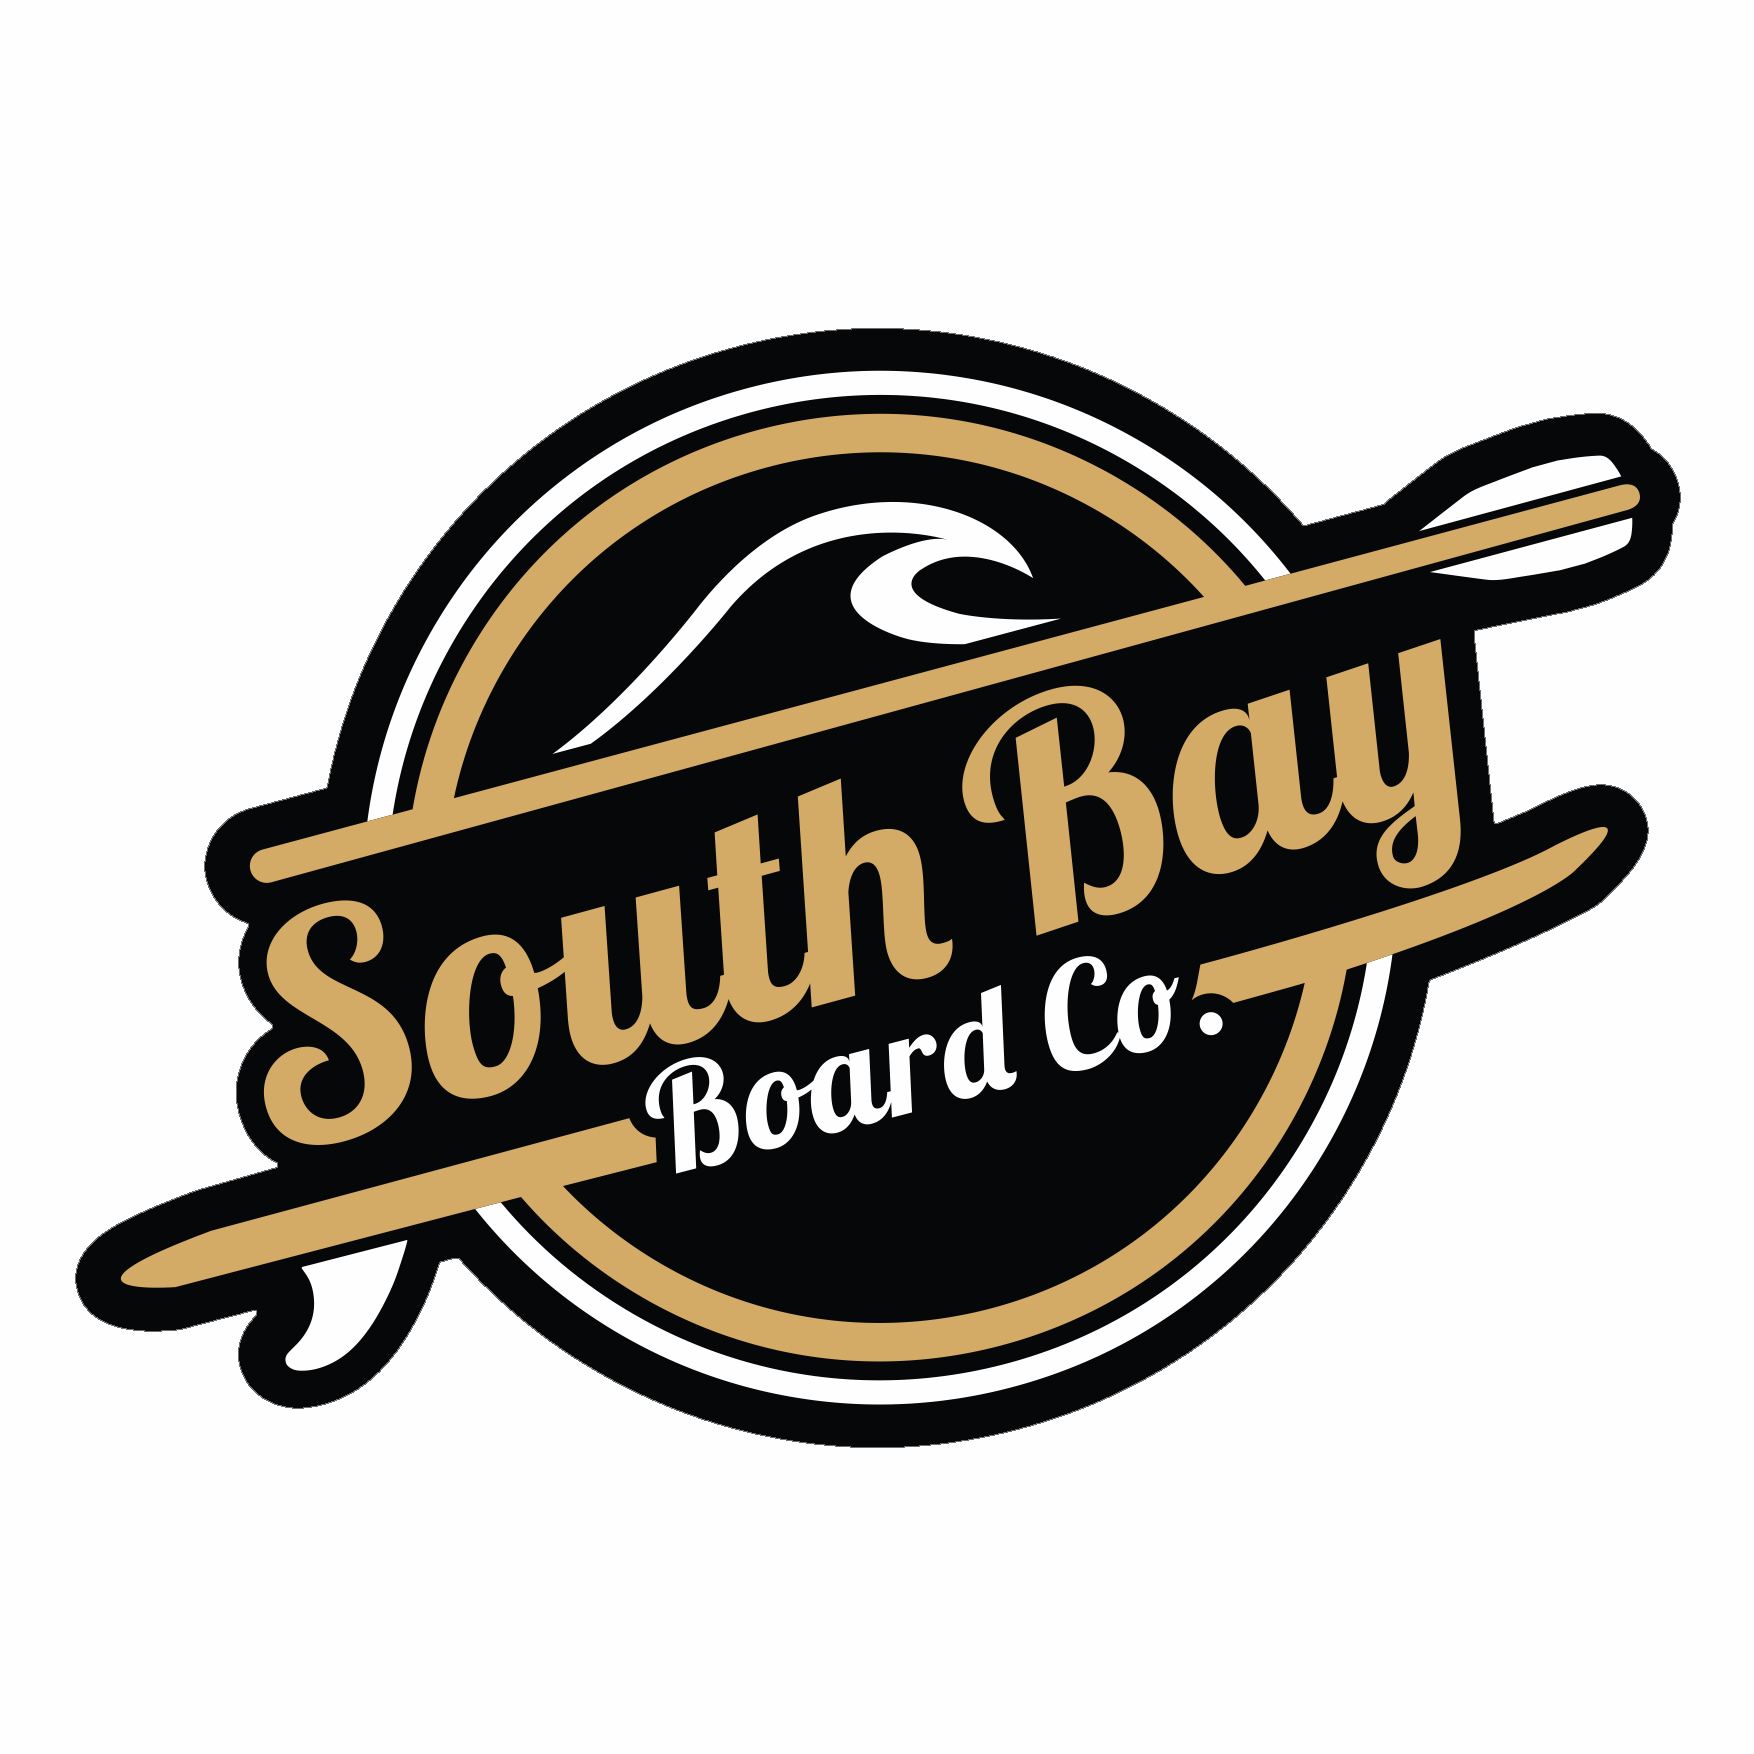 Voucher codes South Bay Board Co.